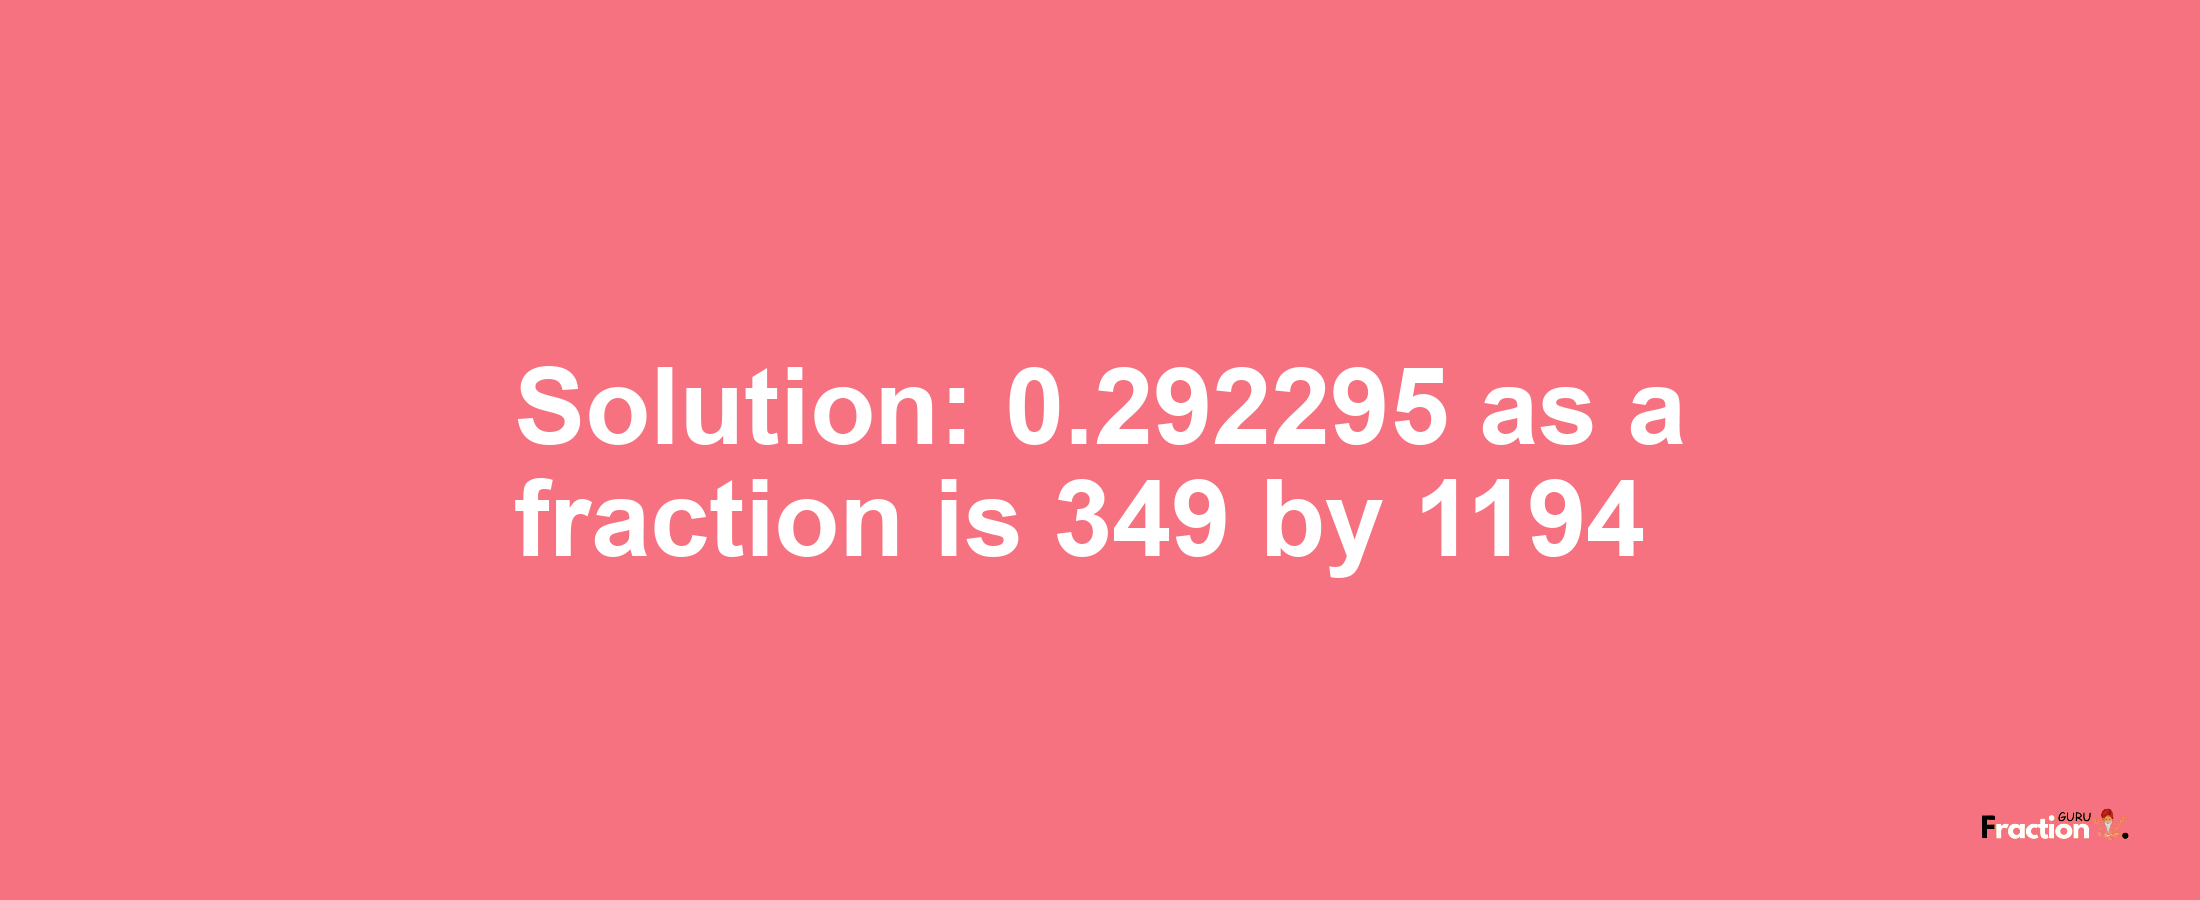 Solution:0.292295 as a fraction is 349/1194